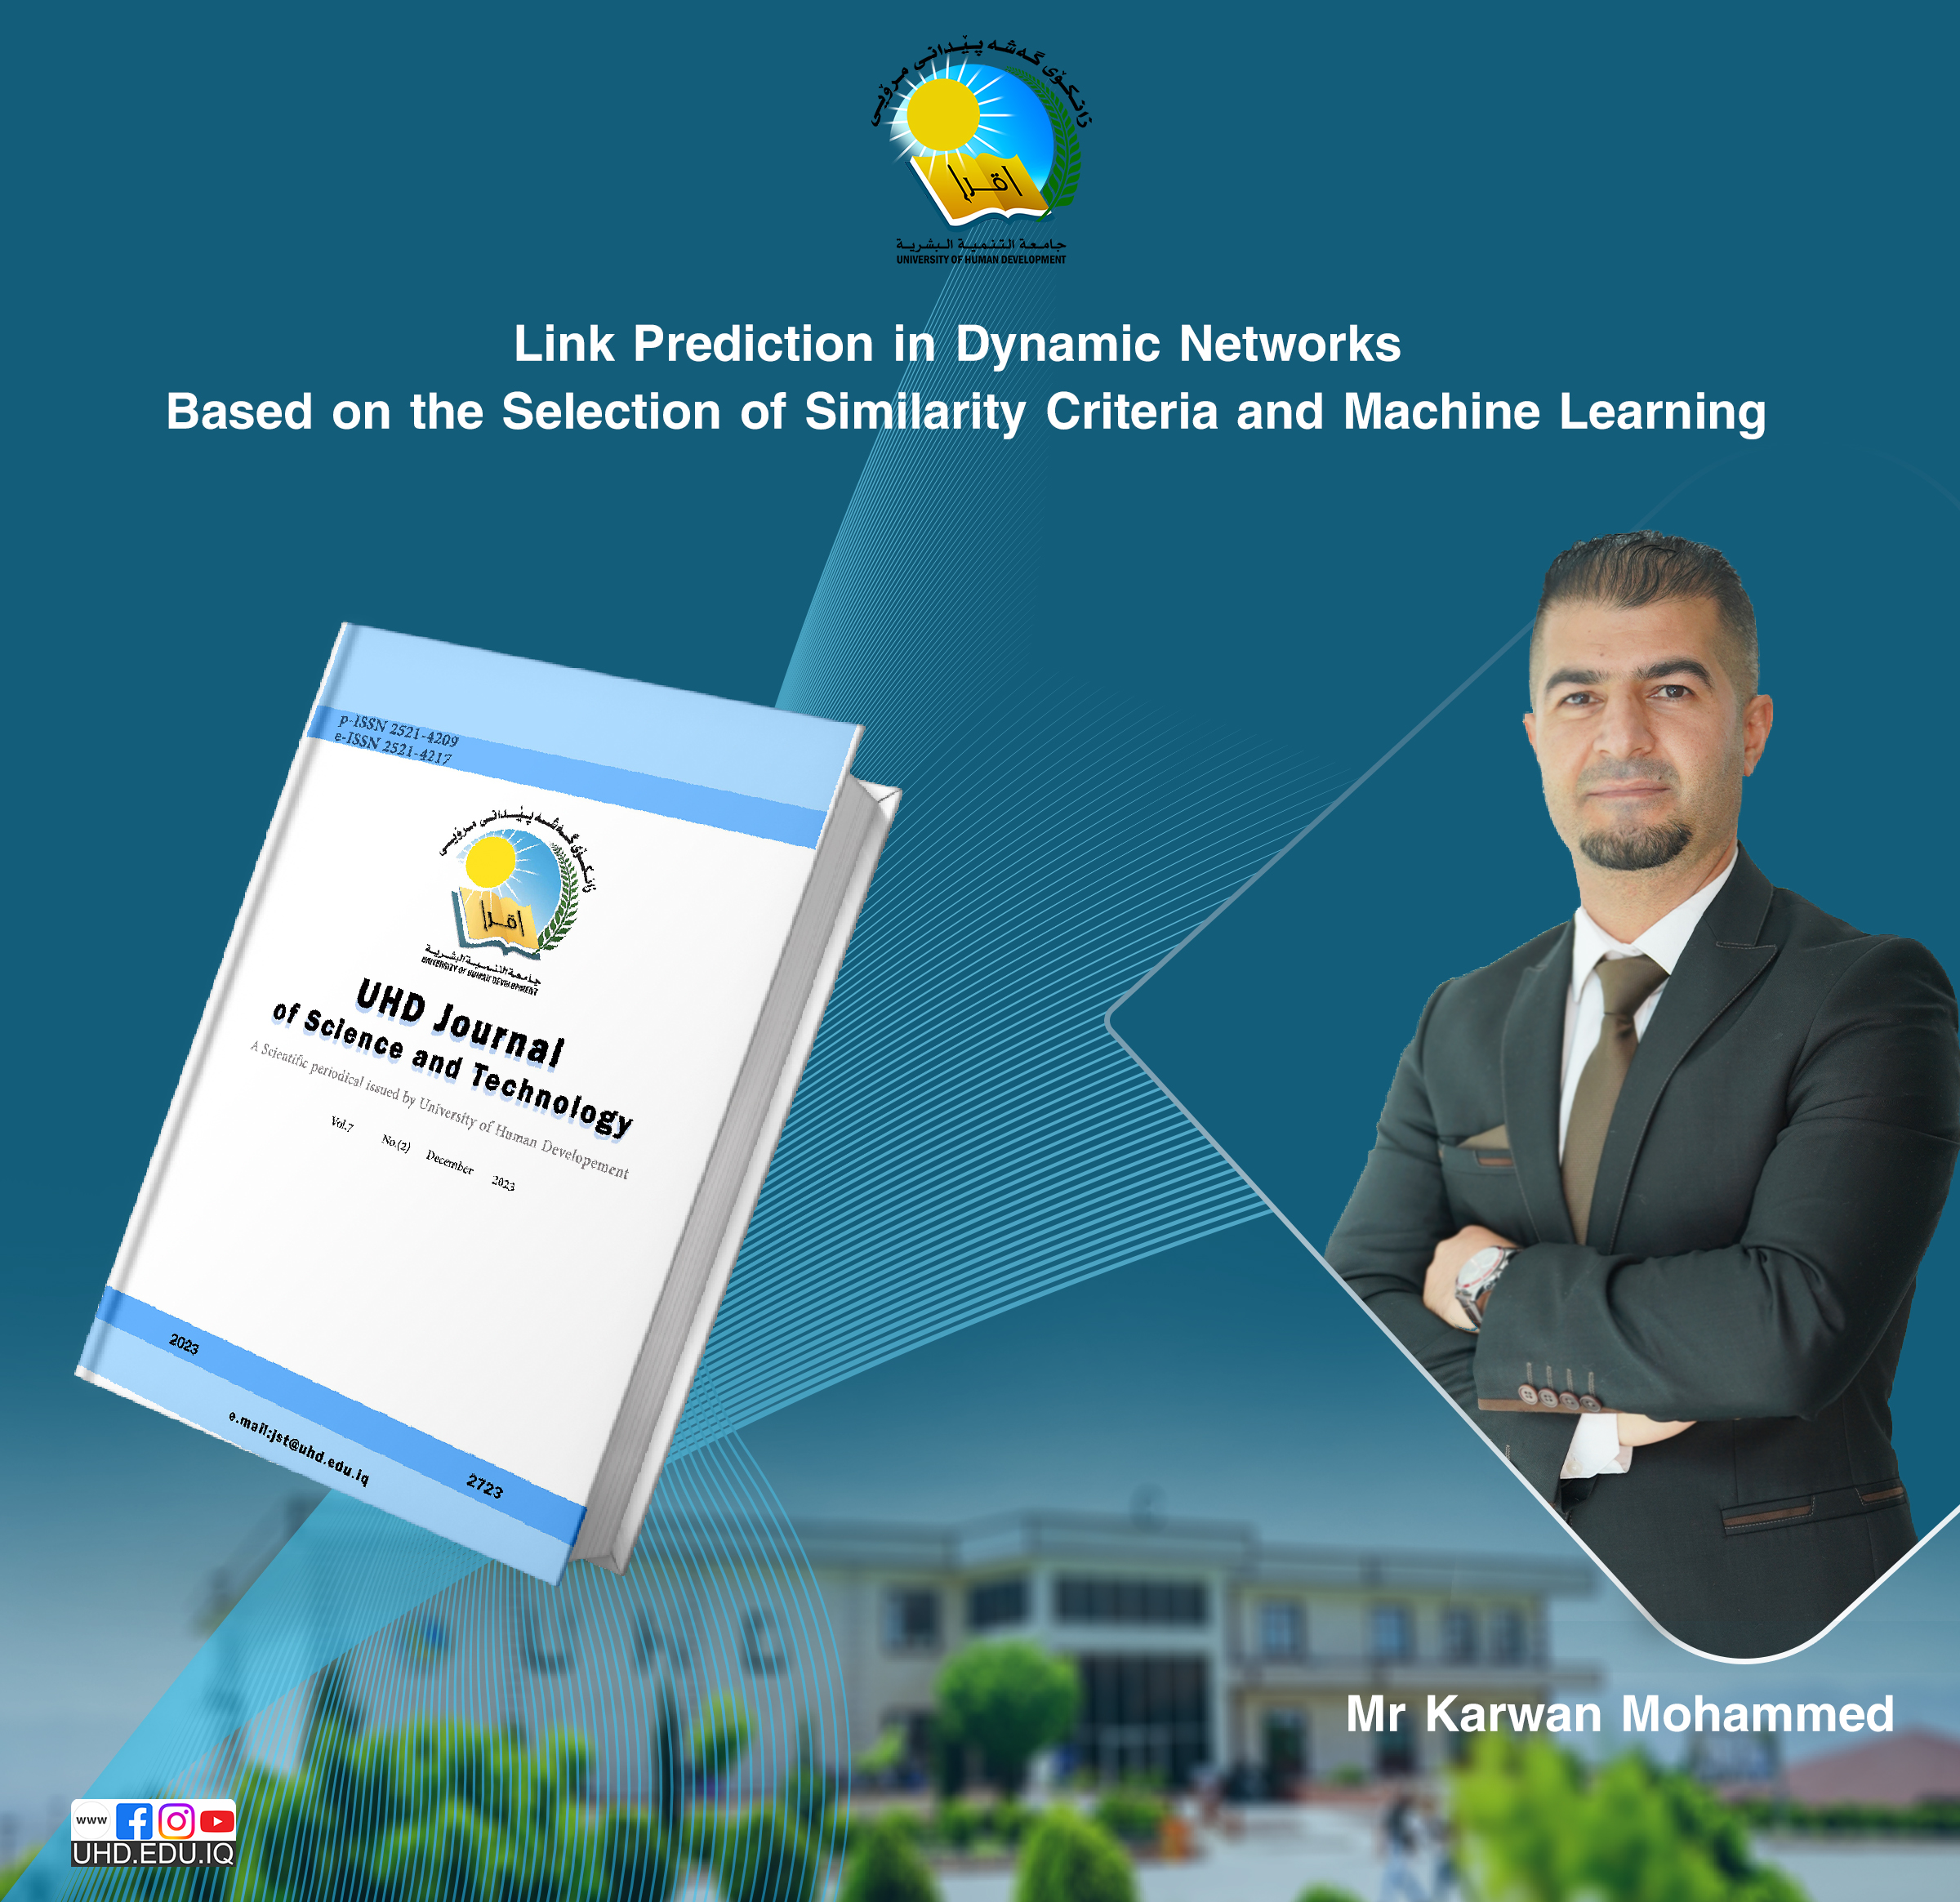 Mr Hamakarim published a research paper on link prediction in dynamic networks